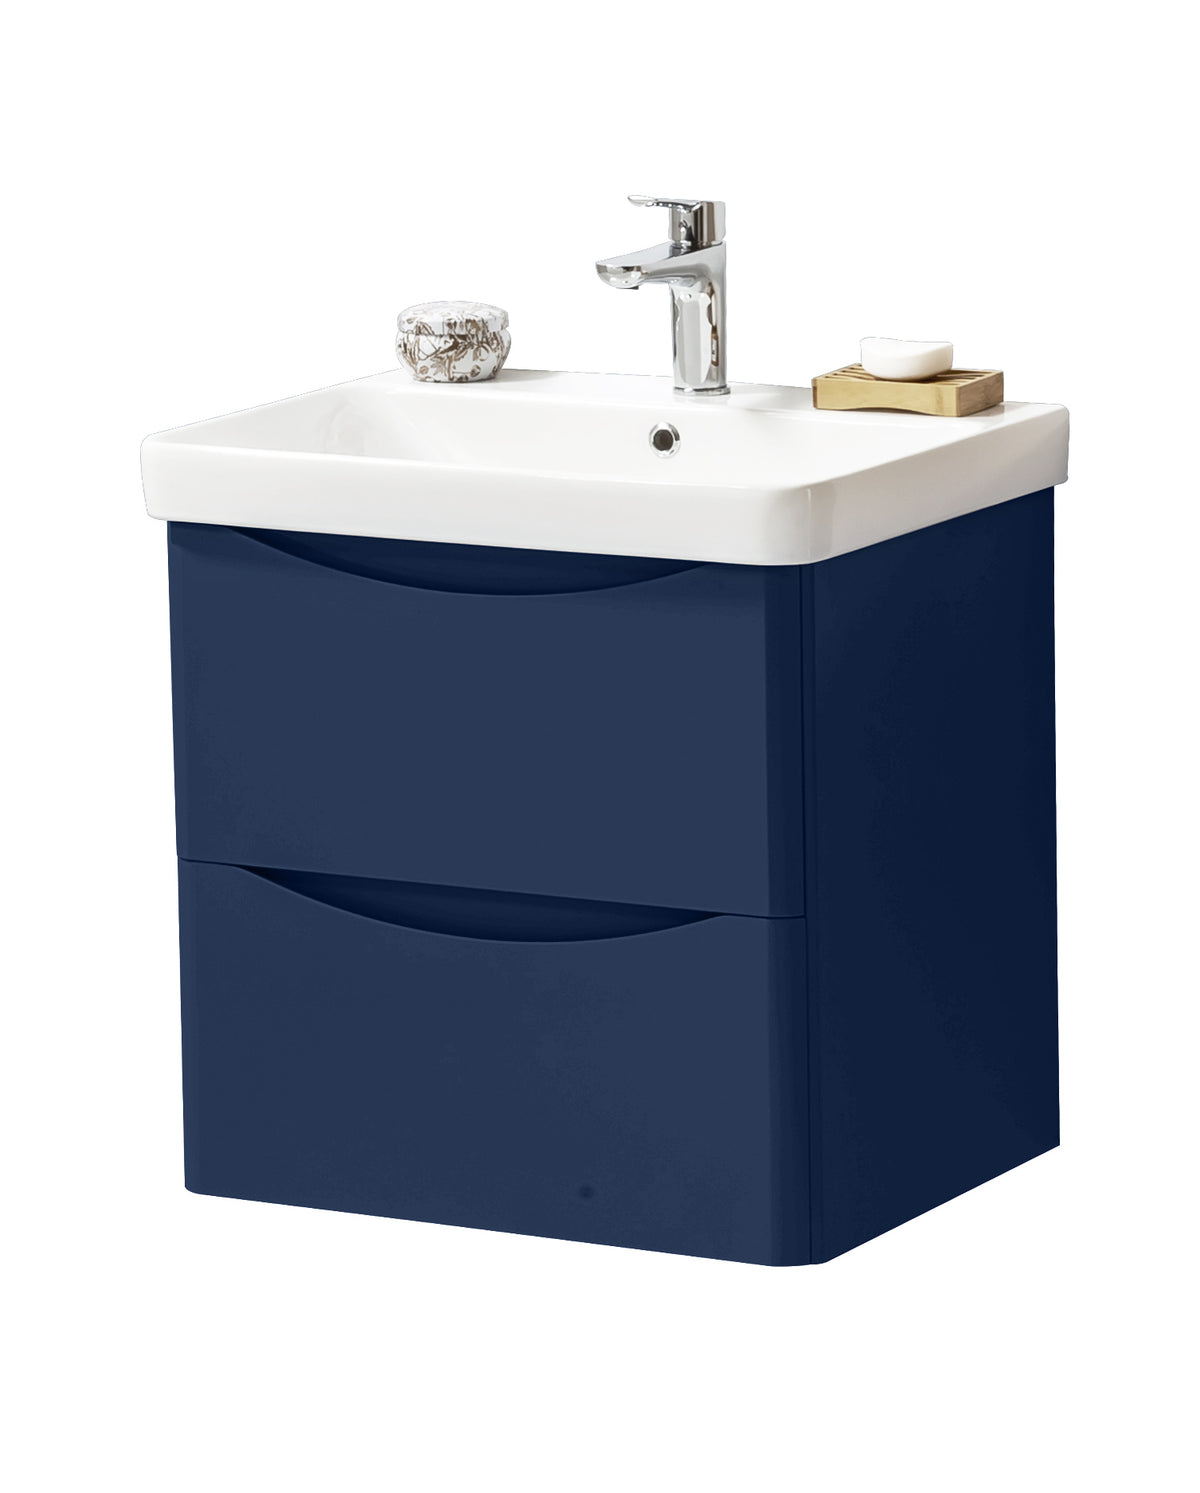 Kartell UK Cayo Blue 500mm Wall Mounted Drawer Unit with Basin